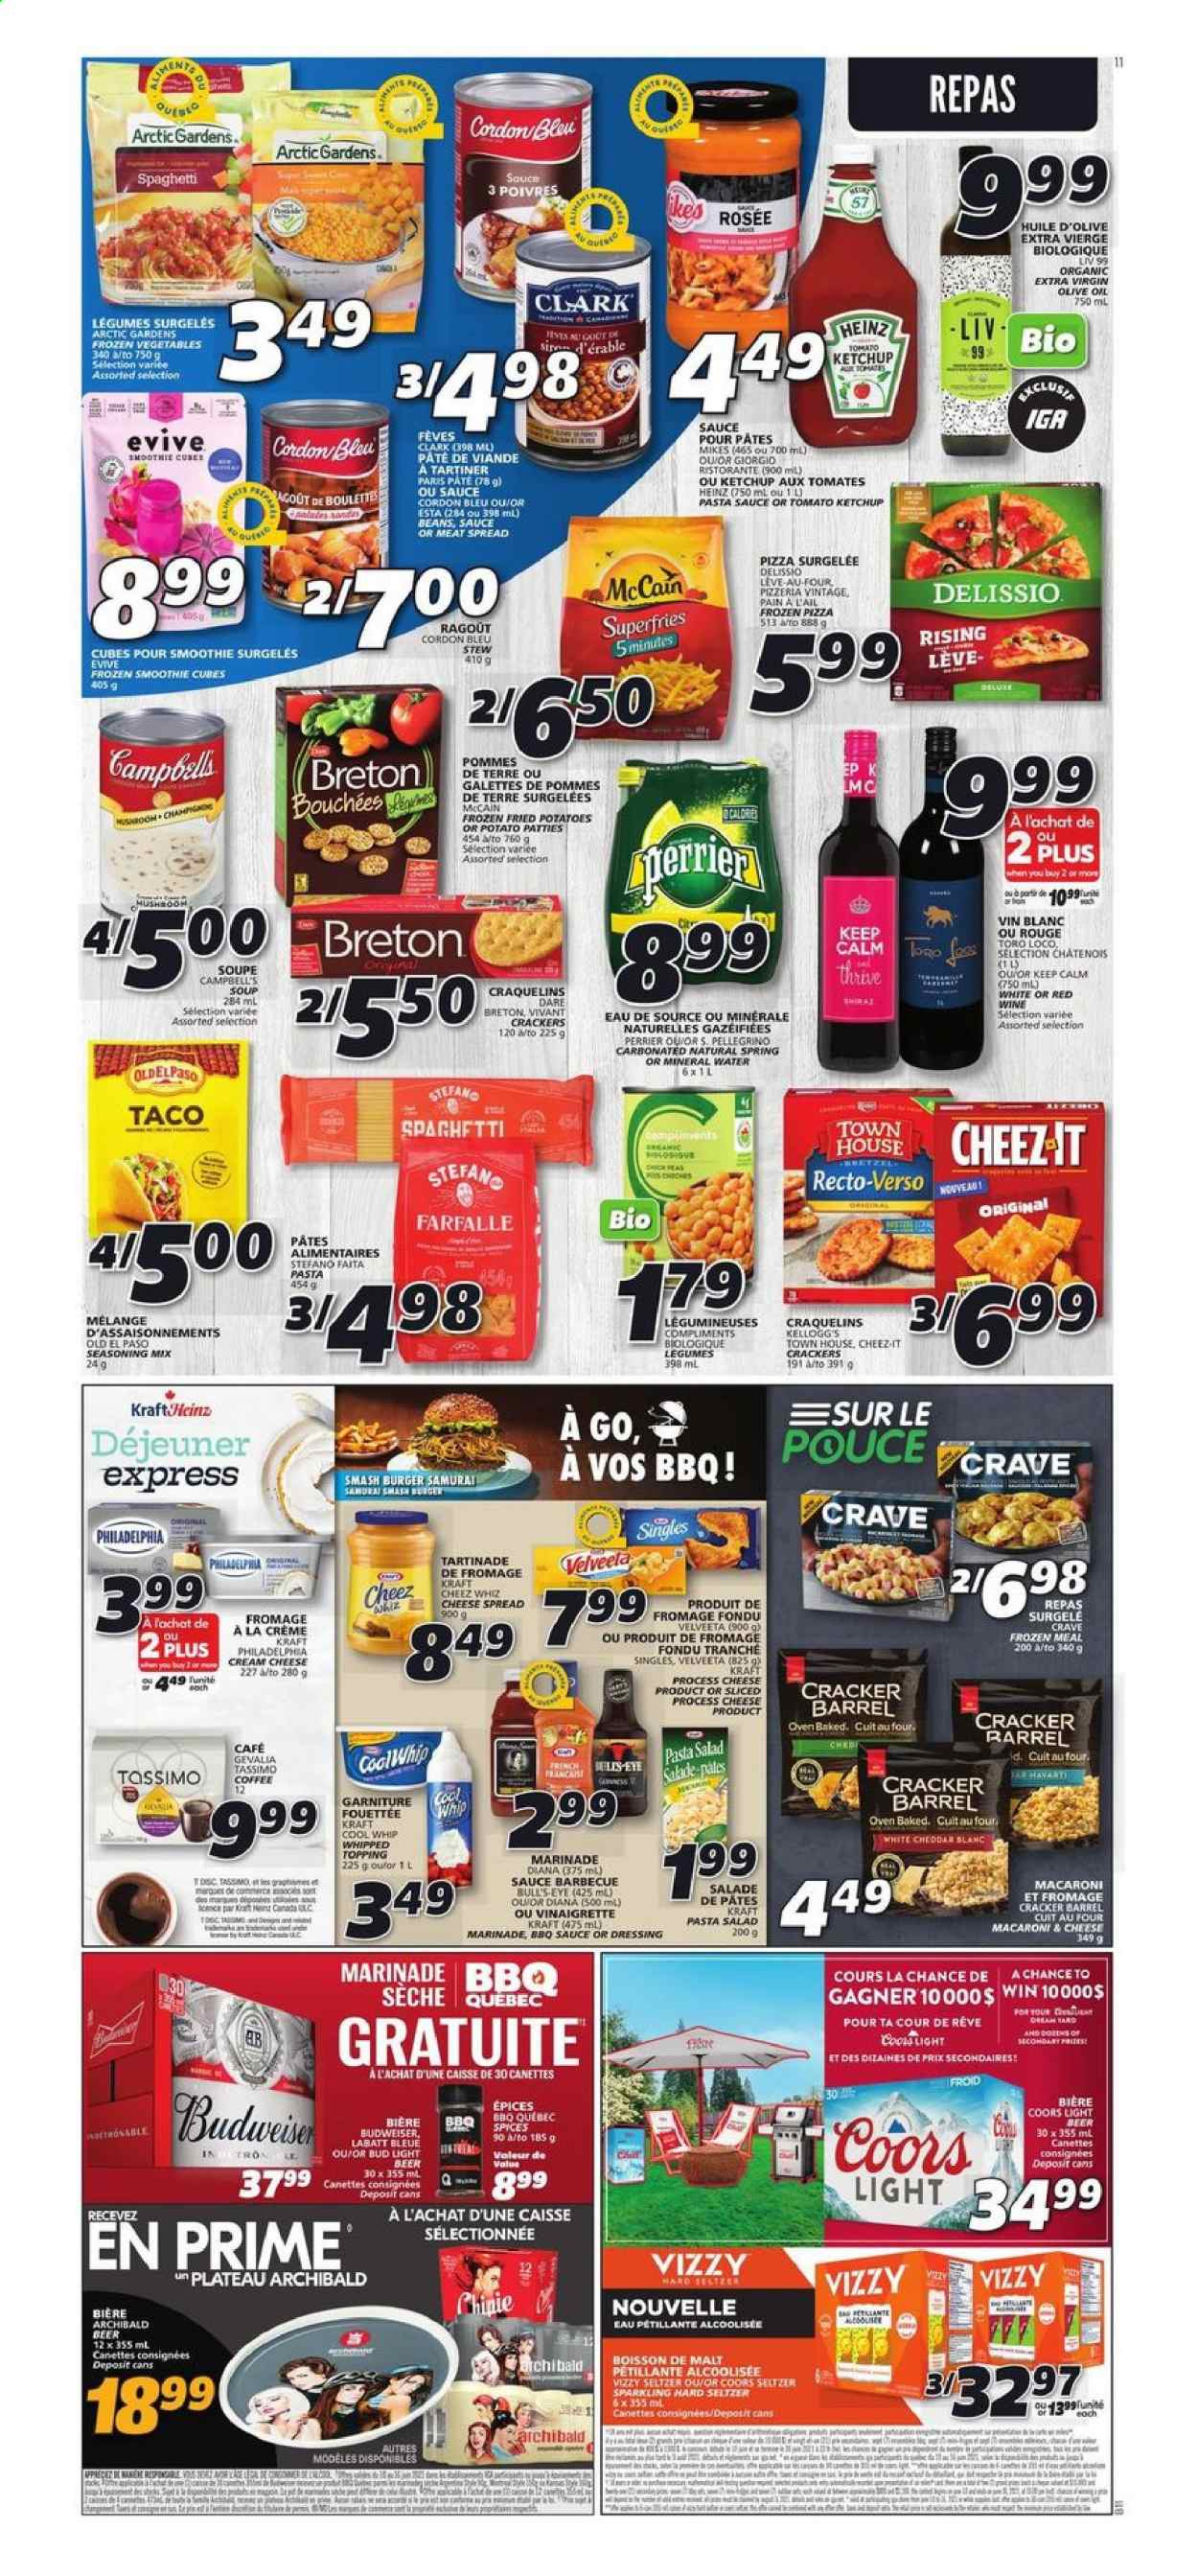 thumbnail - IGA Flyer - June 10, 2021 - June 16, 2021 - Sales products - Old El Paso, potatoes, salad, Campbell's, macaroni & cheese, spaghetti, pizza, pasta sauce, soup, hamburger, Kraft®, cheese spread, pasta salad, cream cheese, Cool Whip, frozen vegetables, frozen smoothie, McCain, potato fries, crackers, Kellogg's, Cheez-It, topping, malt, Heinz, spice, vinaigrette dressing, dressing, marinade, extra virgin olive oil, olive oil, oil, Perrier, smoothie, mineral water, San Pellegrino, coffee, Gevalia, Hard Seltzer, beer, Budweiser, Coors, Bud Light, cordon bleu. Page 9.